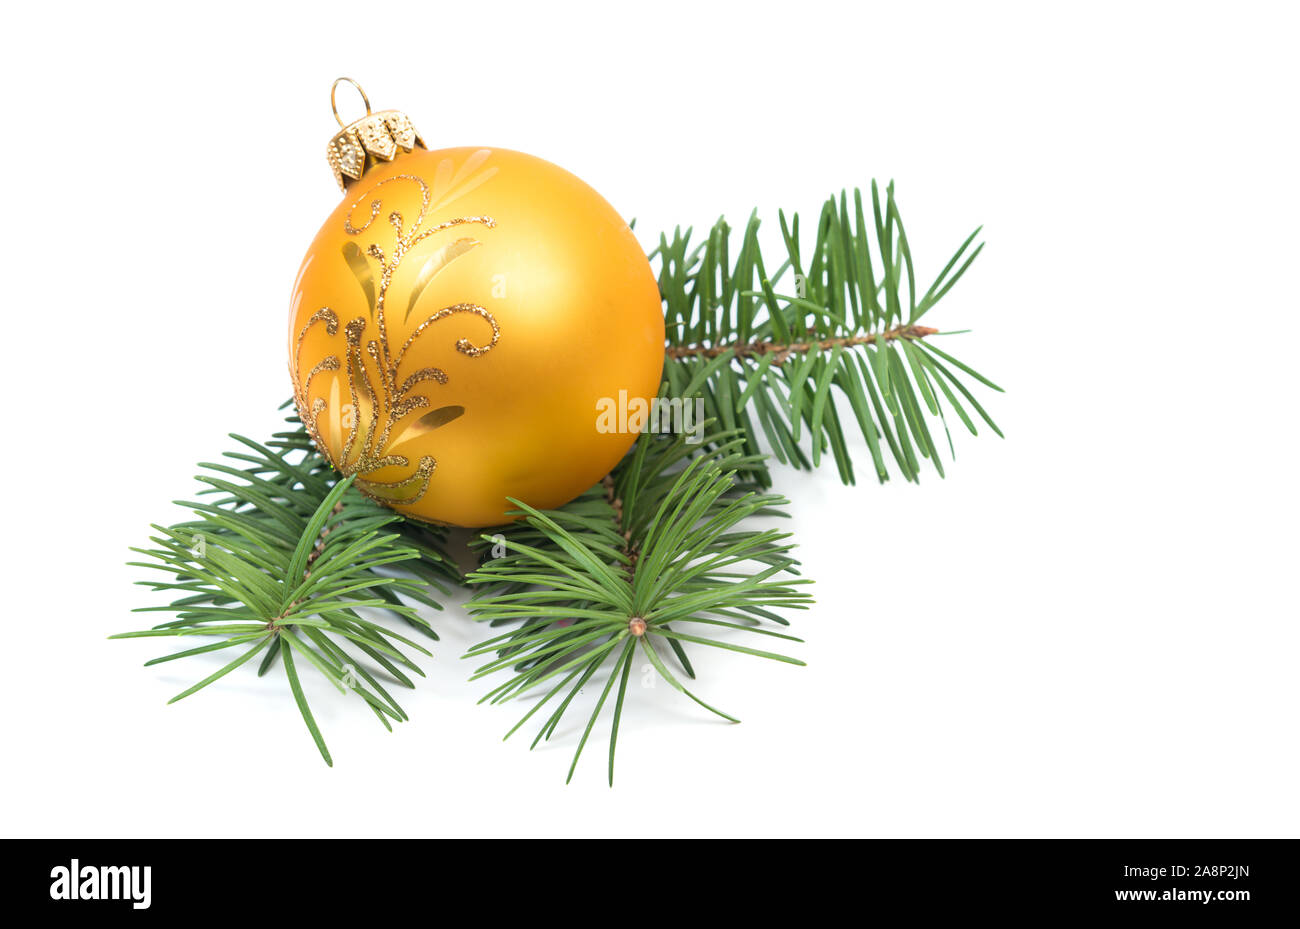 Christmas decoration yellow ball bauble with branches of fir tree on white background Stock Photo